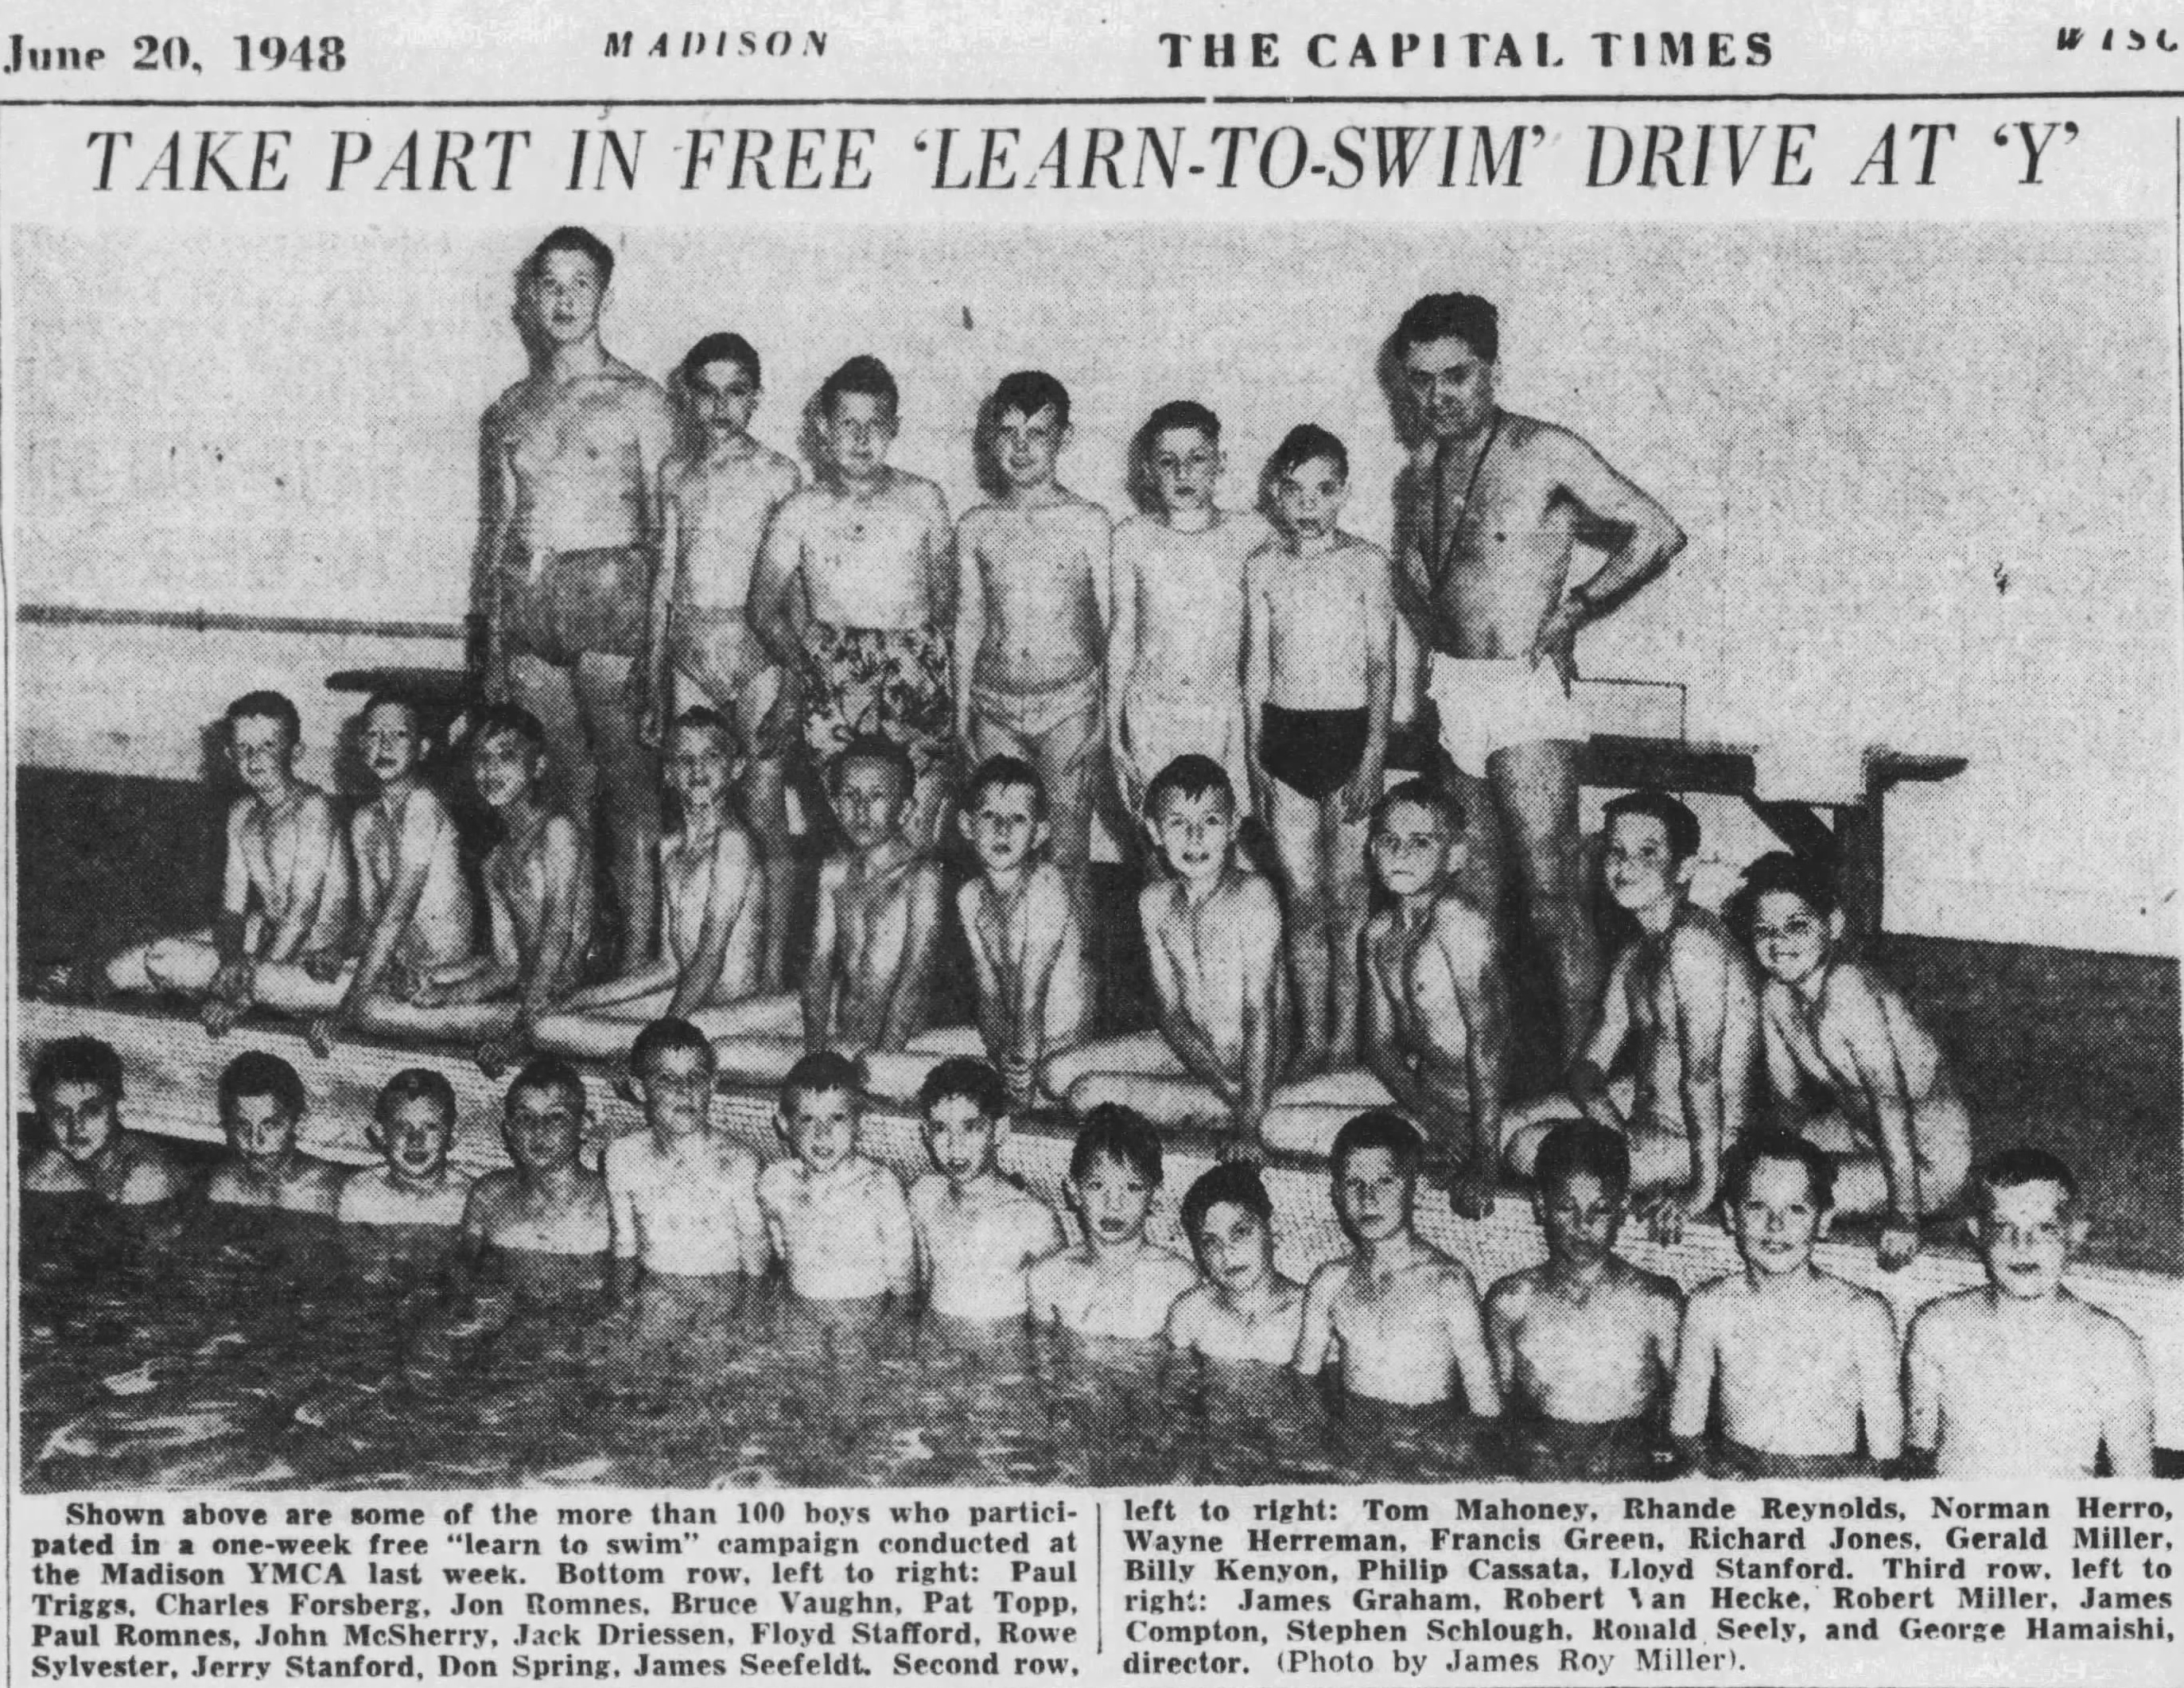 The Capital Times June 20, 1948, photo by James Roy Miller.jpg